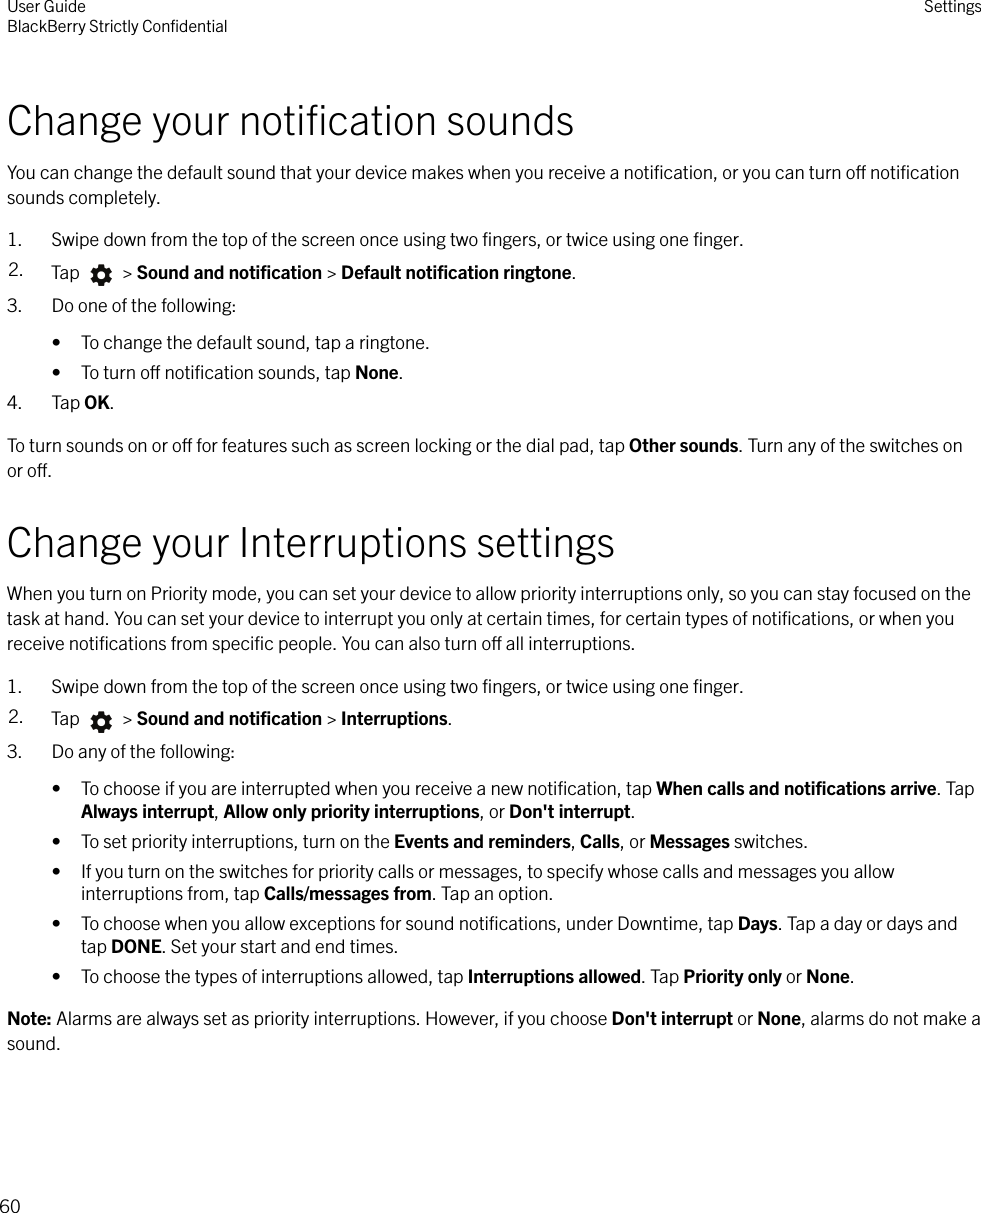 Change your notiﬁcation soundsYou can change the default sound that your device makes when you receive a notiﬁcation, or you can turn o notiﬁcationsounds completely.1. Swipe down from the top of the screen once using two ﬁngers, or twice using one ﬁnger.2. Tap   &gt; Sound and notiﬁcation &gt; Default notiﬁcation ringtone.3. Do one of the following:• To change the default sound, tap a ringtone.• To turn o notiﬁcation sounds, tap None.4. Tap OK.To turn sounds on or o for features such as screen locking or the dial pad, tap Other sounds. Turn any of the switches onor o.Change your Interruptions settingsWhen you turn on Priority mode, you can set your device to allow priority interruptions only, so you can stay focused on thetask at hand. You can set your device to interrupt you only at certain times, for certain types of notiﬁcations, or when youreceive notiﬁcations from speciﬁc people. You can also turn o all interruptions.1. Swipe down from the top of the screen once using two ﬁngers, or twice using one ﬁnger.2. Tap   &gt; Sound and notiﬁcation &gt; Interruptions.3. Do any of the following:• To choose if you are interrupted when you receive a new notiﬁcation, tap When calls and notiﬁcations arrive. TapAlways interrupt, Allow only priority interruptions, or Don&apos;t interrupt.• To set priority interruptions, turn on the Events and reminders, Calls, or Messages switches.• If you turn on the switches for priority calls or messages, to specify whose calls and messages you allowinterruptions from, tap Calls/messages from. Tap an option.• To choose when you allow exceptions for sound notiﬁcations, under Downtime, tap Days. Tap a day or days andtap DONE. Set your start and end times.• To choose the types of interruptions allowed, tap Interruptions allowed. Tap Priority only or None.Note: Alarms are always set as priority interruptions. However, if you choose Don&apos;t interrupt or None, alarms do not make asound.User GuideBlackBerry Strictly ConﬁdentialSettings60